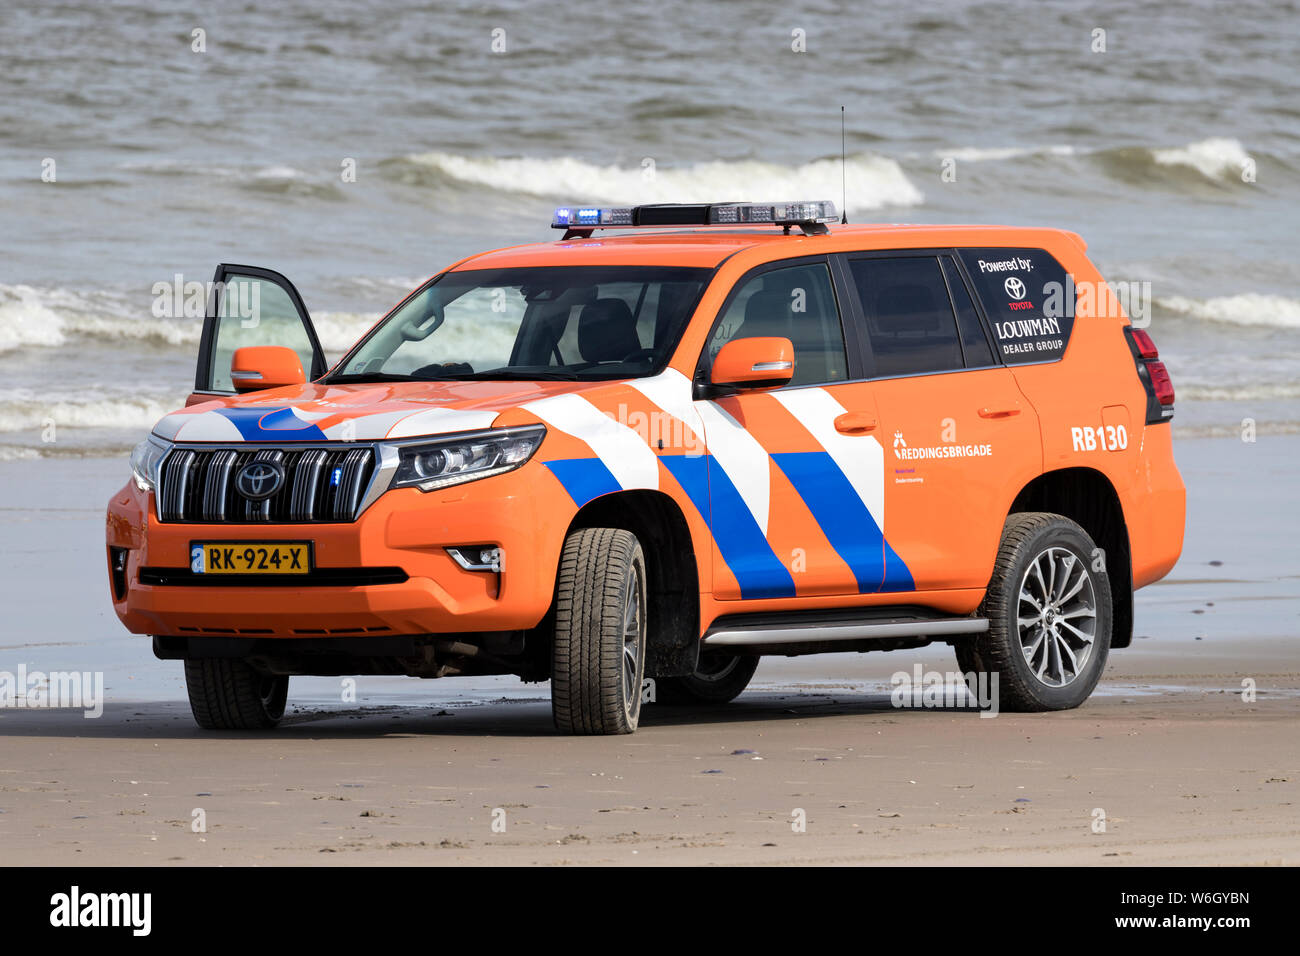 Dutch lifeguard Toyota Land Cruiser with active blue emergency lighting on the beach Stock Photo